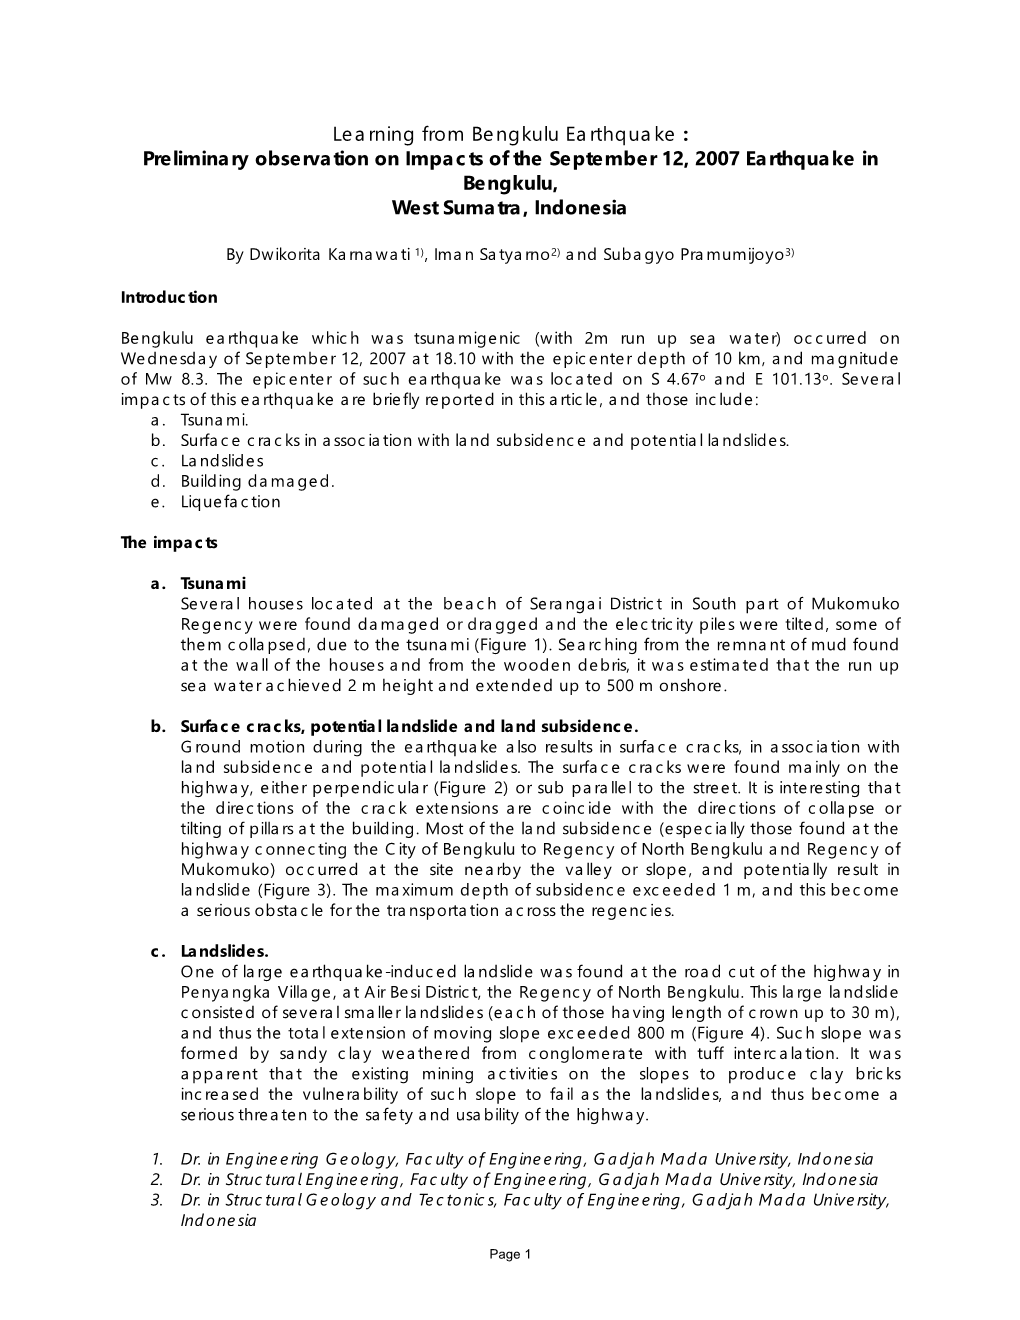 Learning from Bengkulu Earthquake : Preliminary Observation on Impacts of the September 12, 2007 Earthquake in Bengkulu, West Sumatra, Indonesia